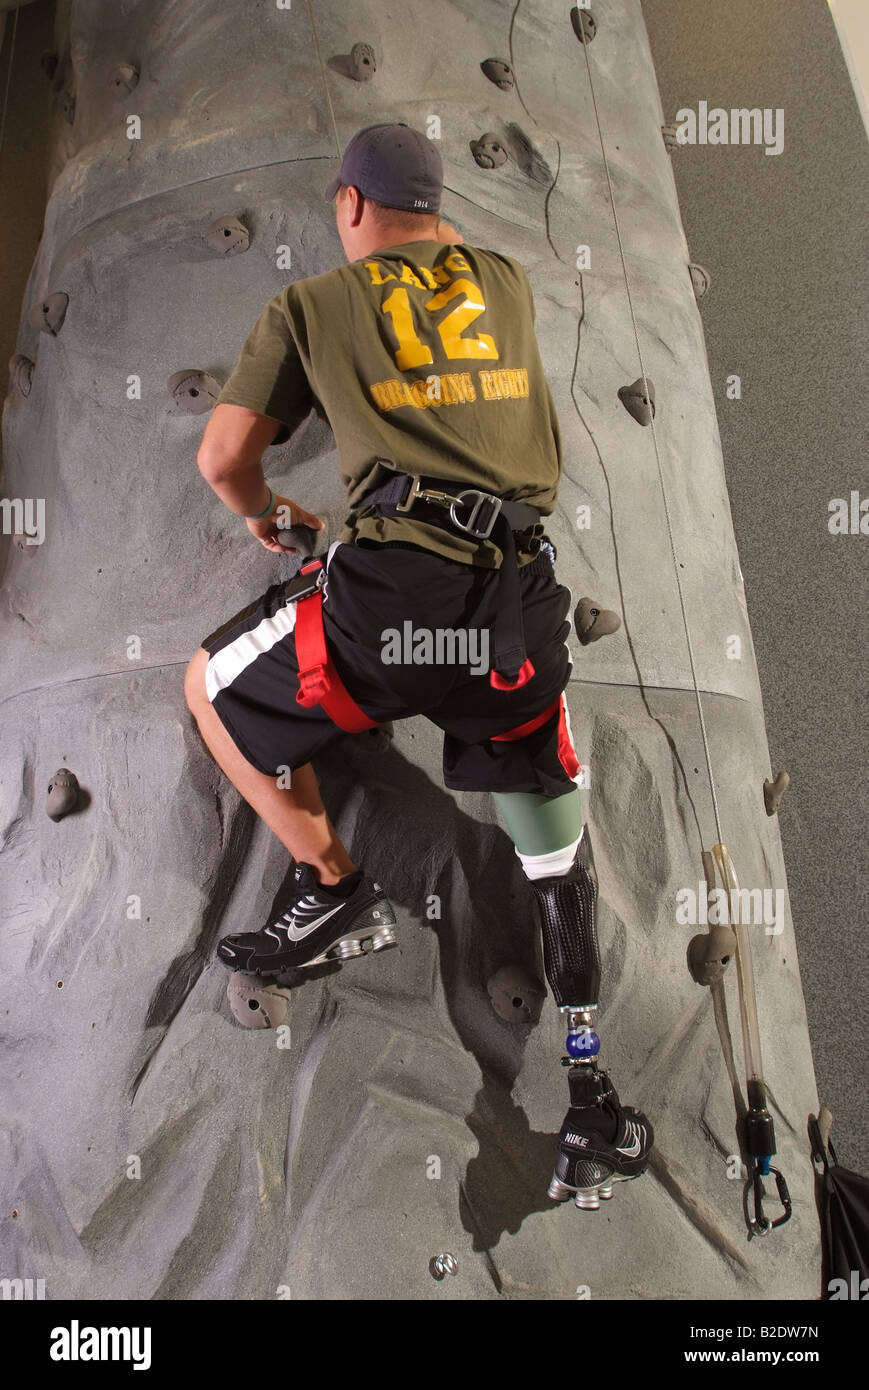 us-soldier-with-prosthetic-leg-learns-to